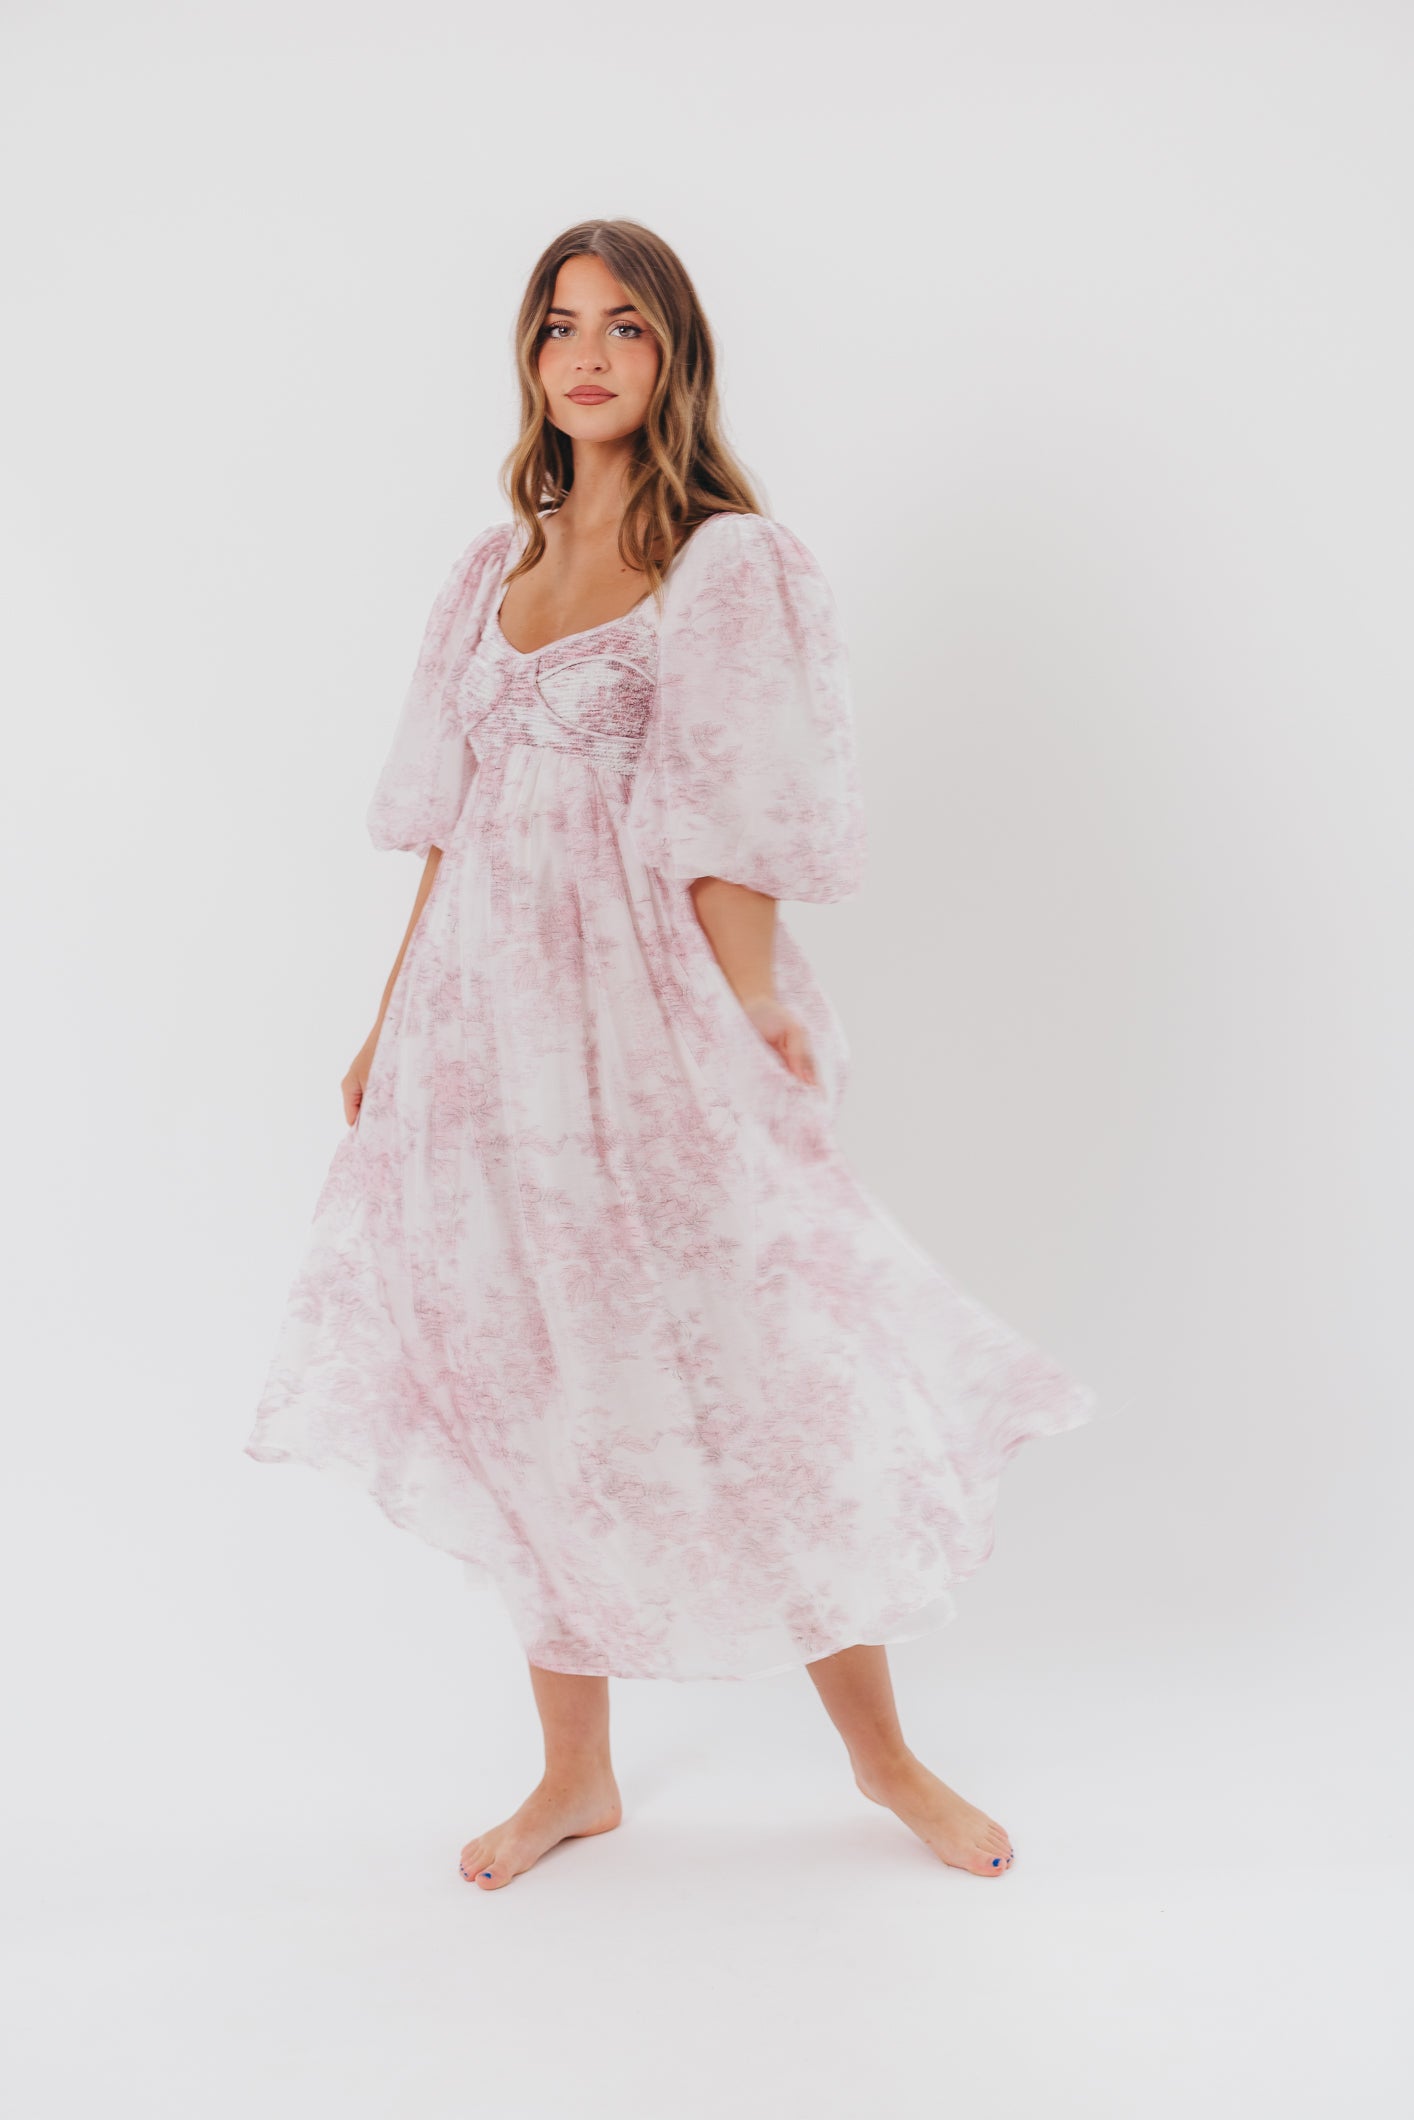 Harlow Midi Dress in Light Pink Floral - Bump Friendly & Inclusive Sizing (S-3XL)